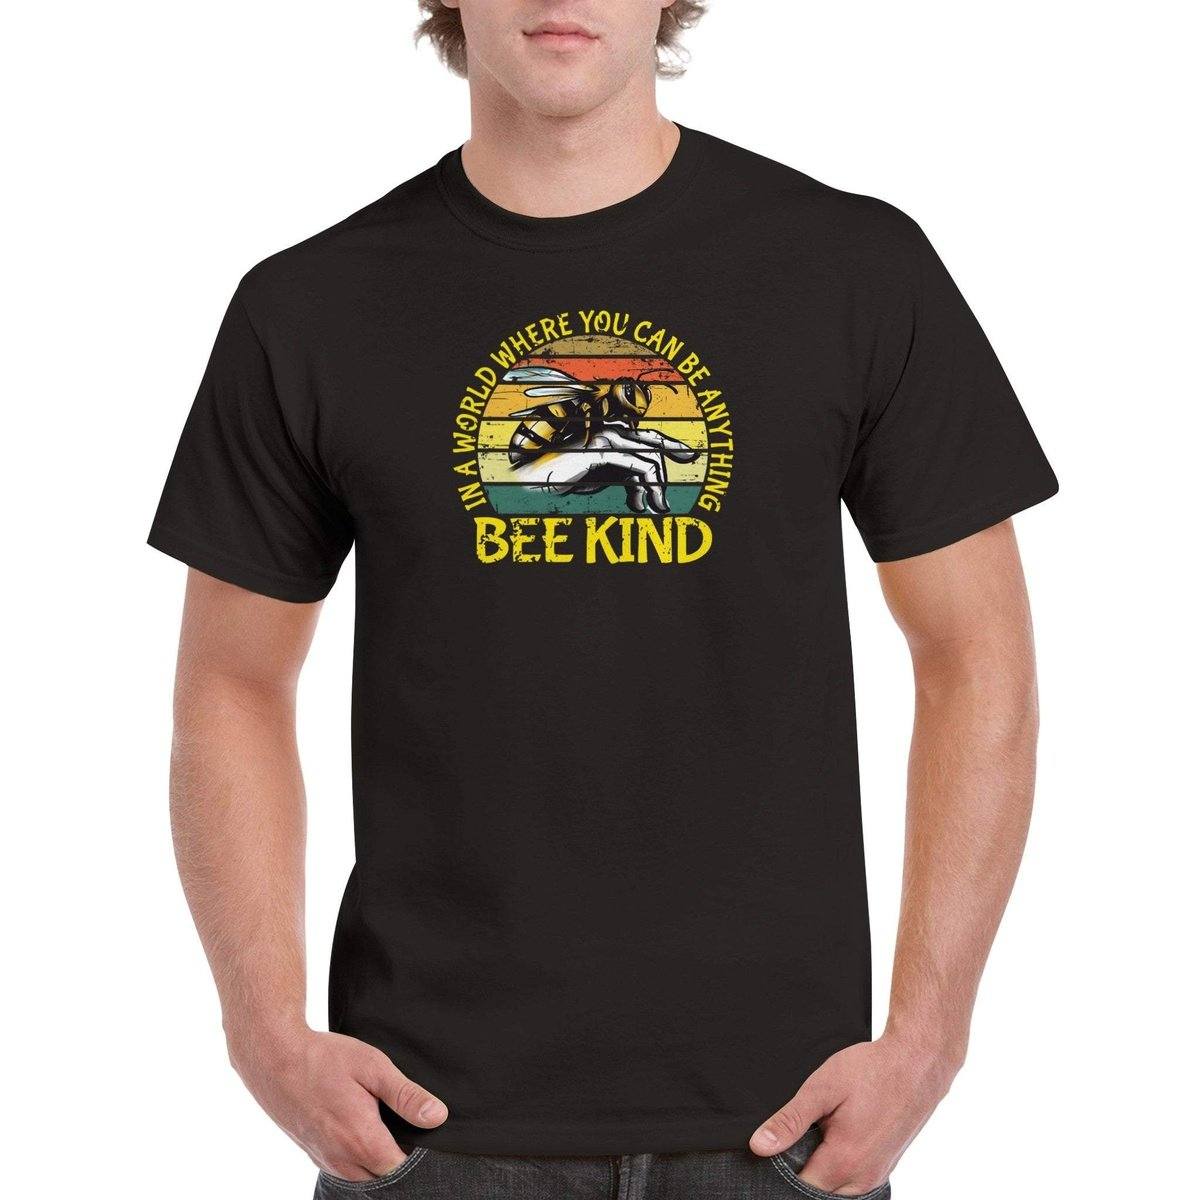 In a world where you can be anything bee kind Tshirt - Retro Vintage Bee - Unisex Crewneck T-shirt Australia Online Color